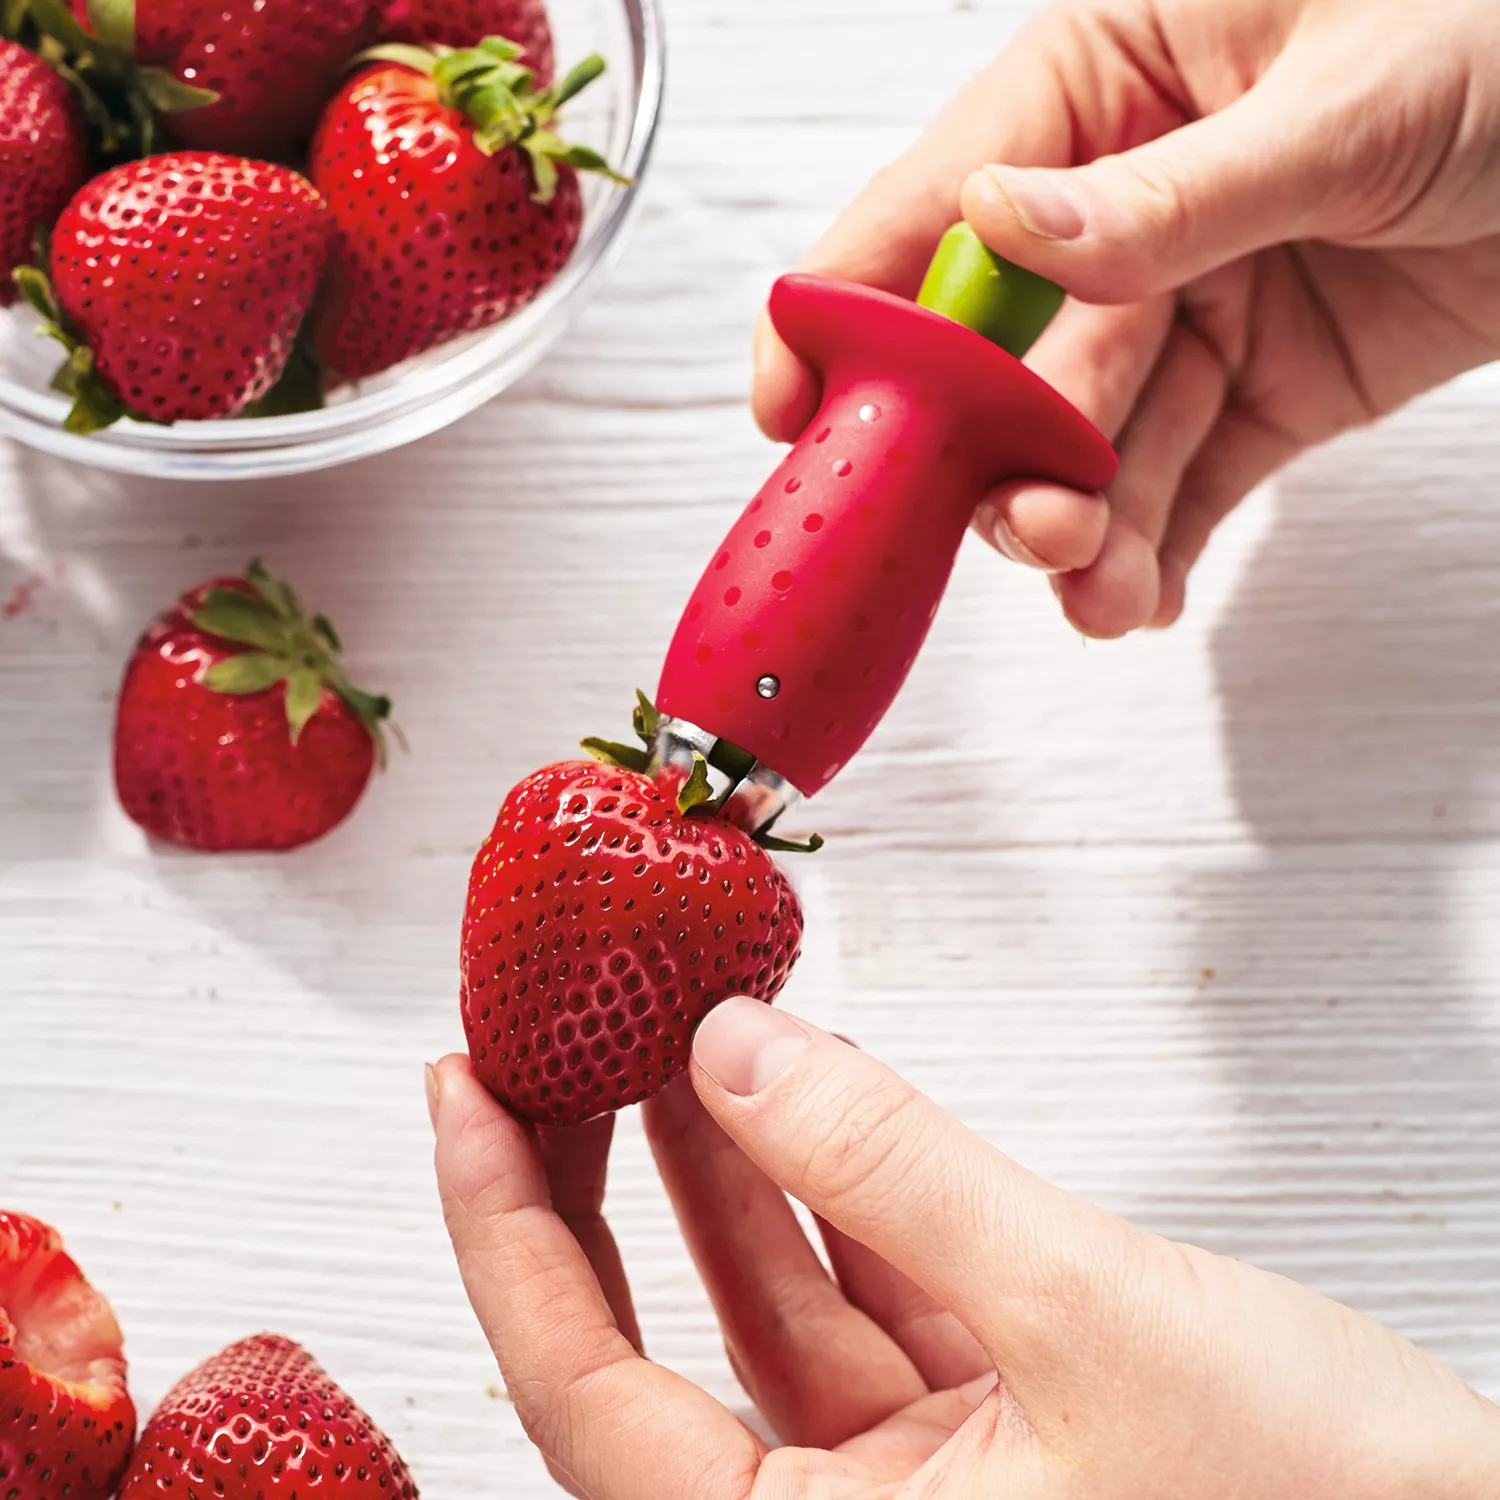 STRAWBERRY SLICER: Top 6 Must-Have Strawberry Slicers for Your Kitchen! 